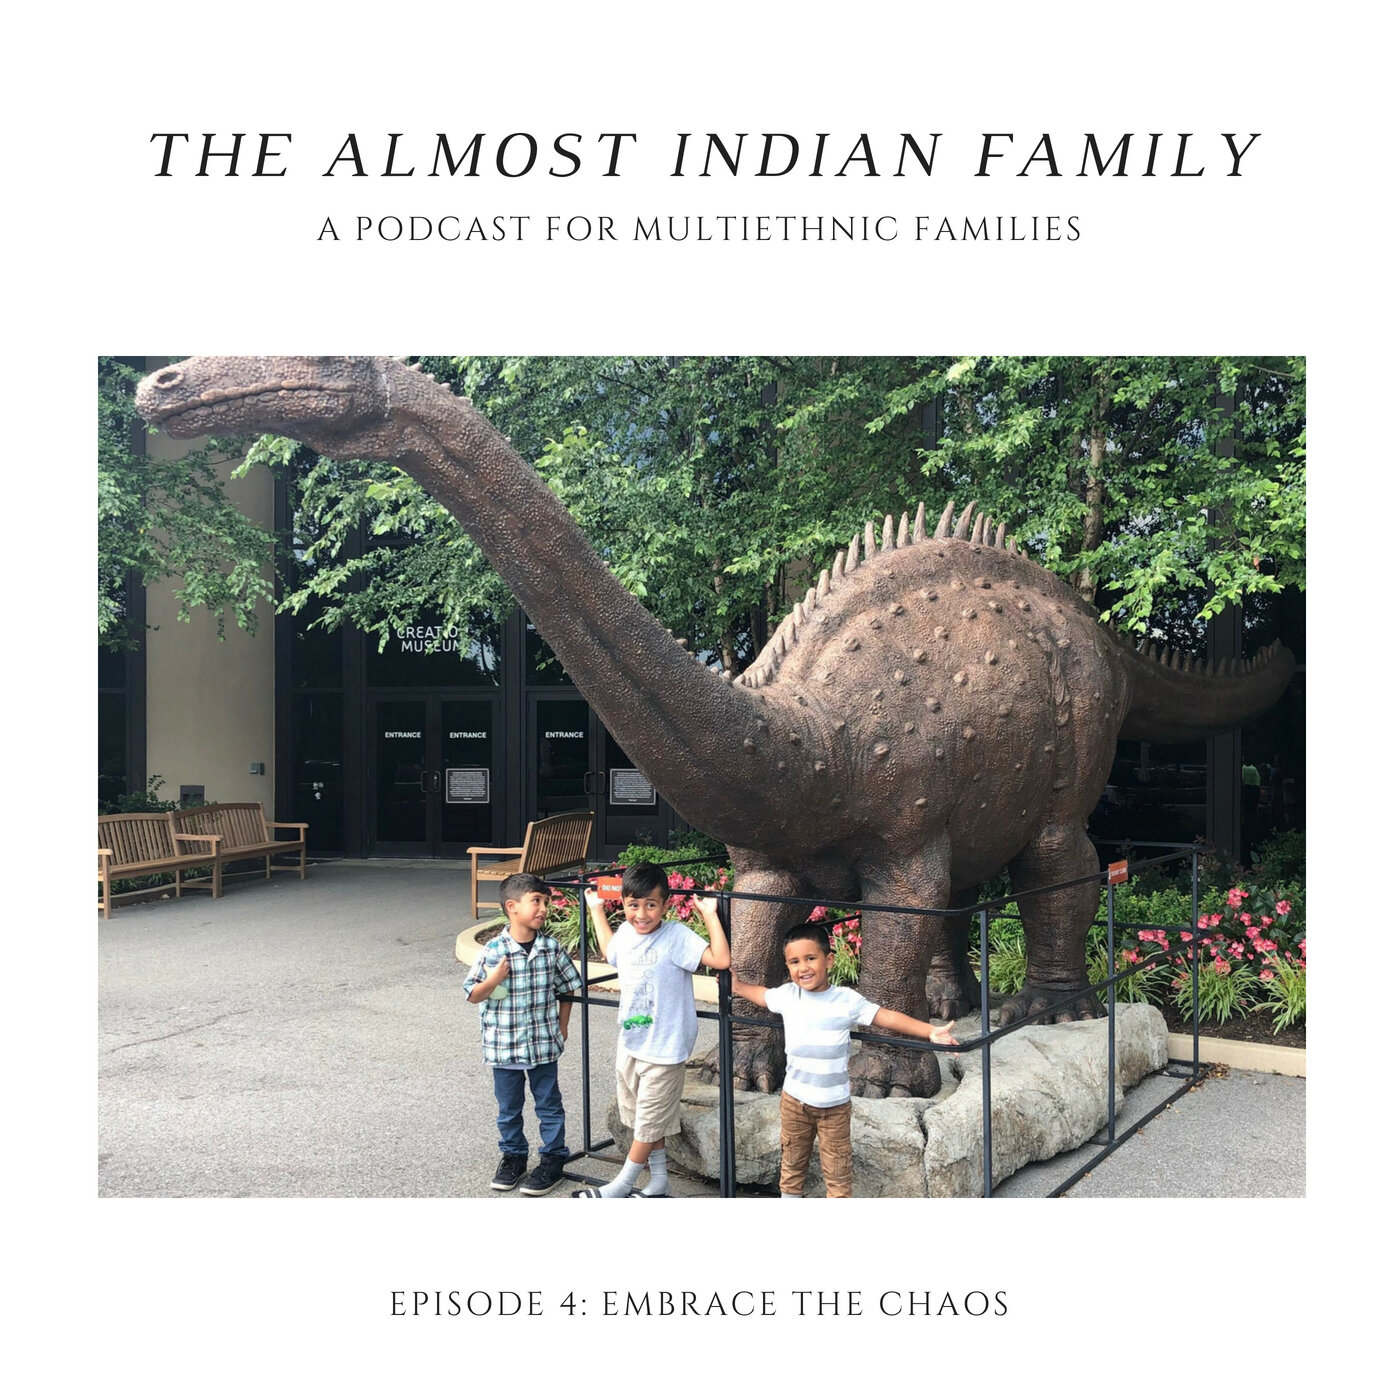 The Almost Indian Family Podcast